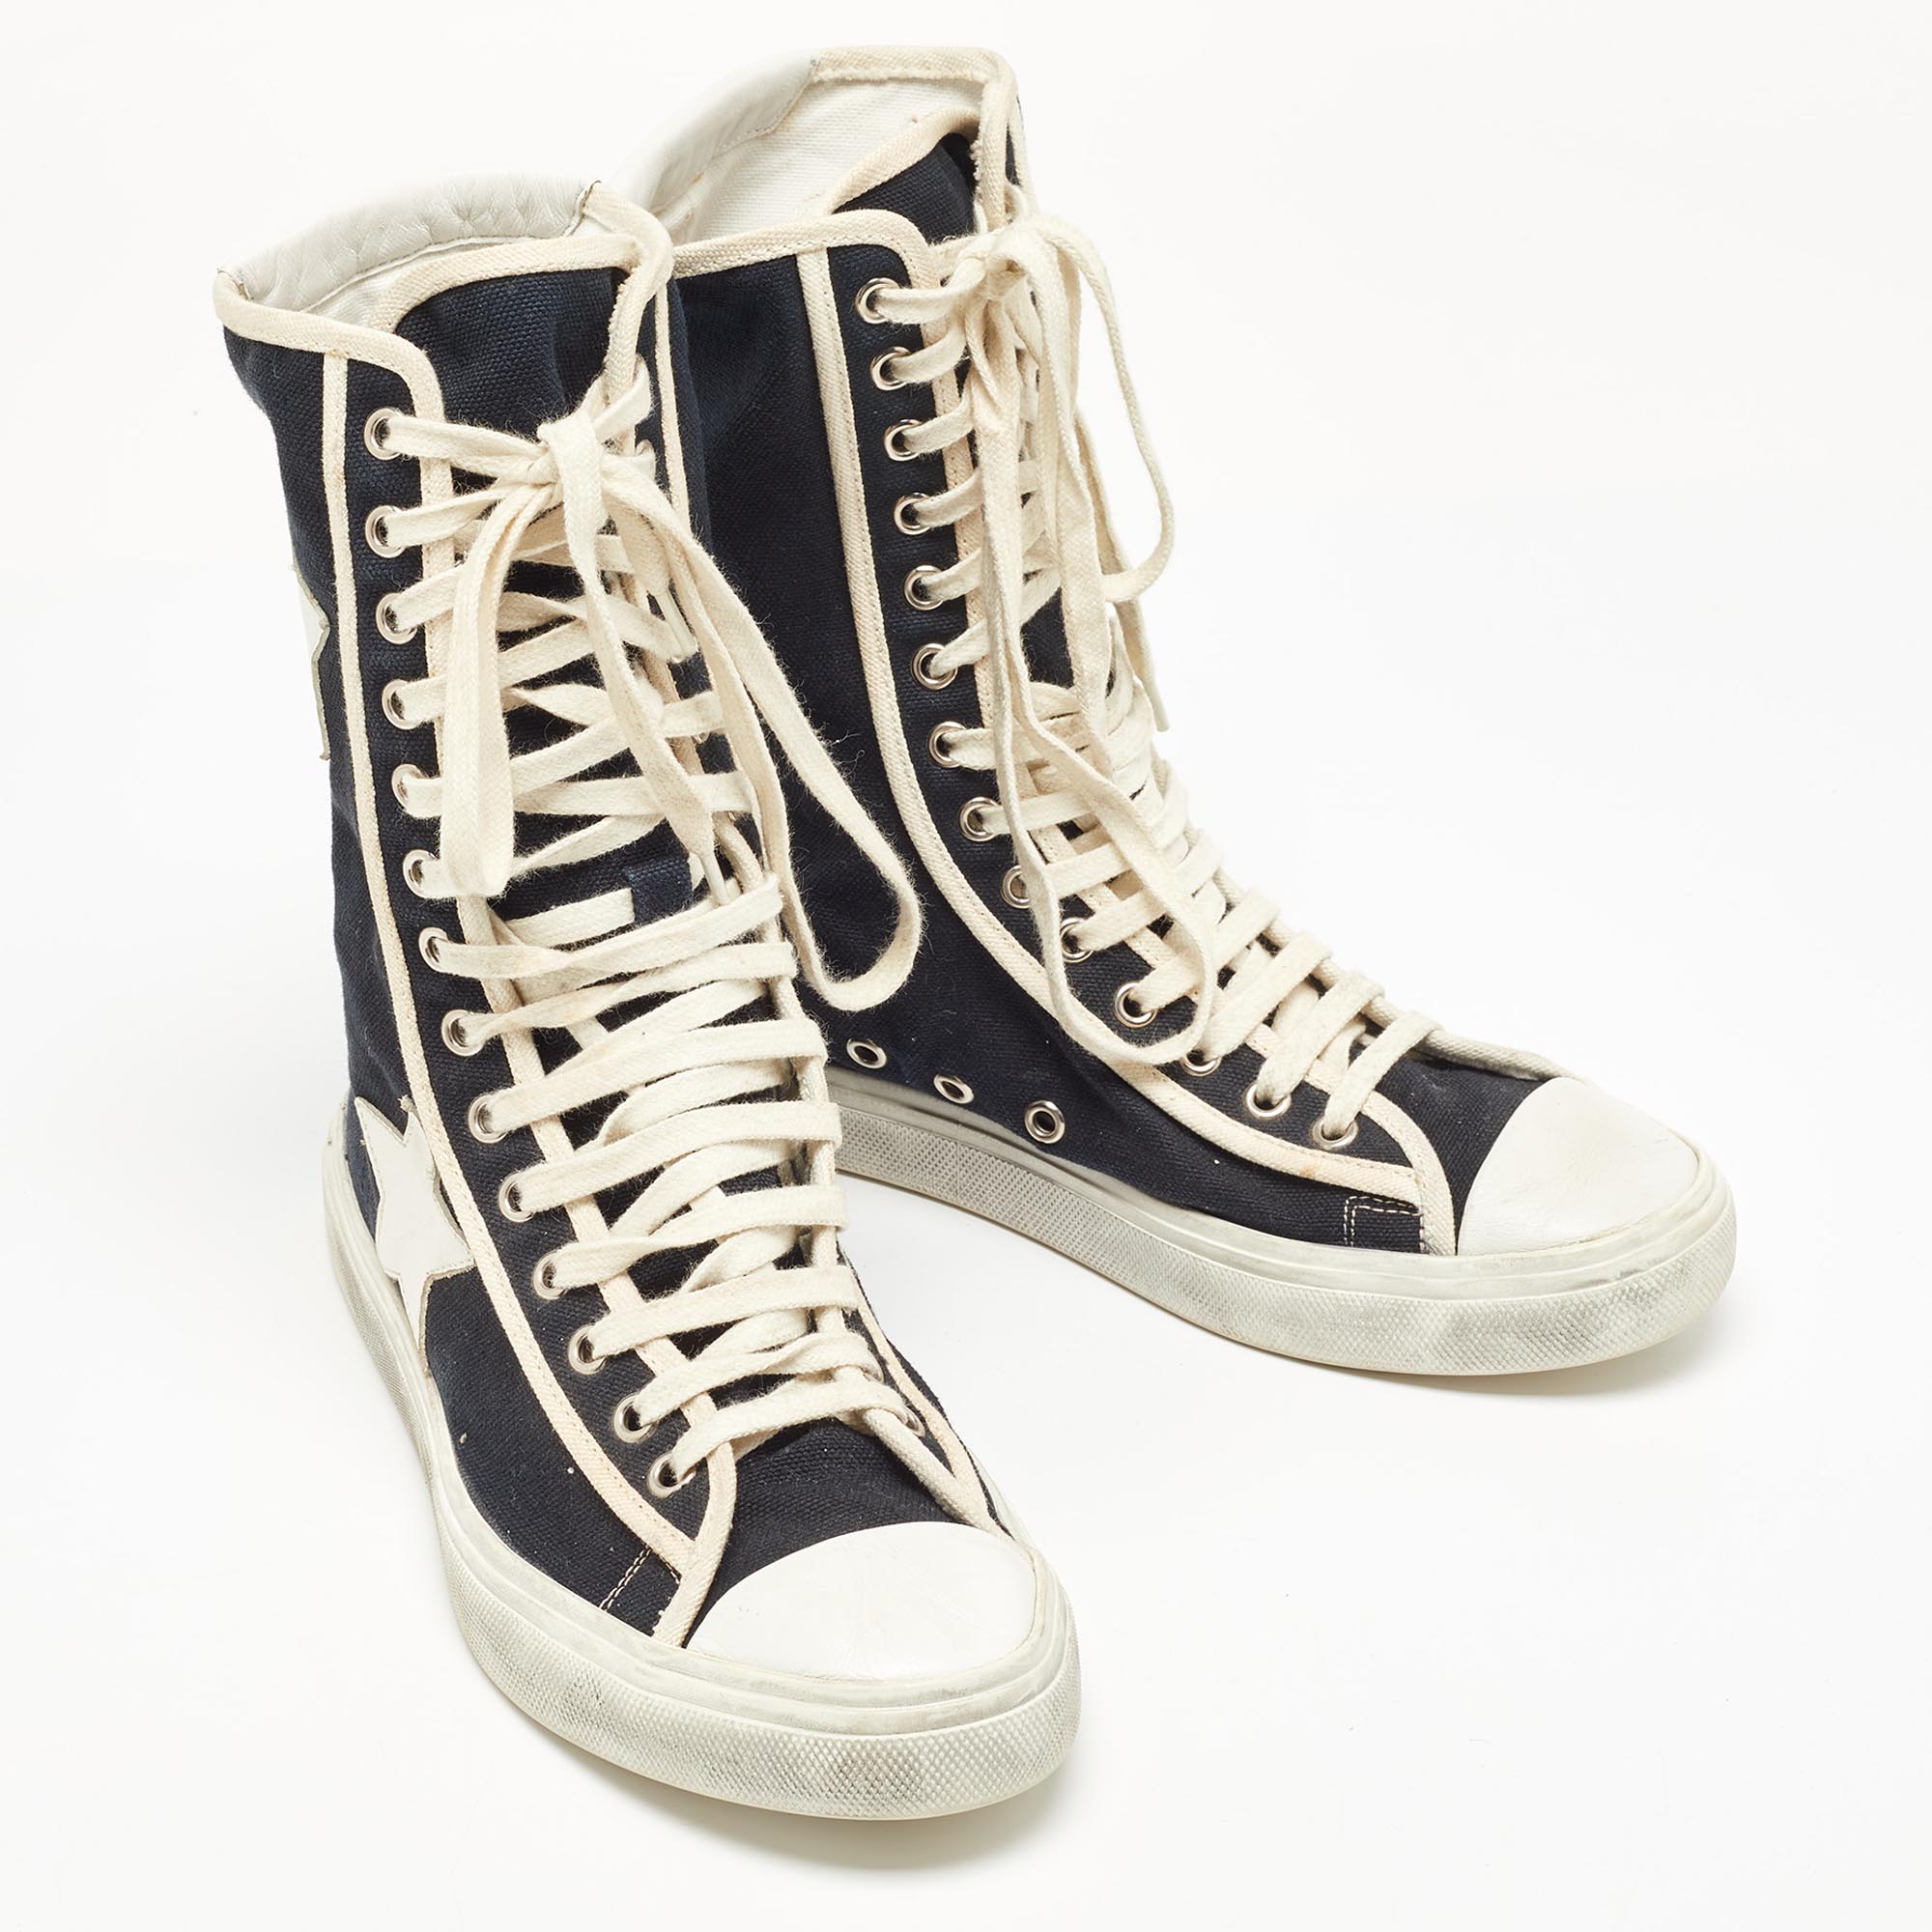 Saint Laurent Black/White Canvas And Leather Star Applique High Top Sneakers Size 37.5